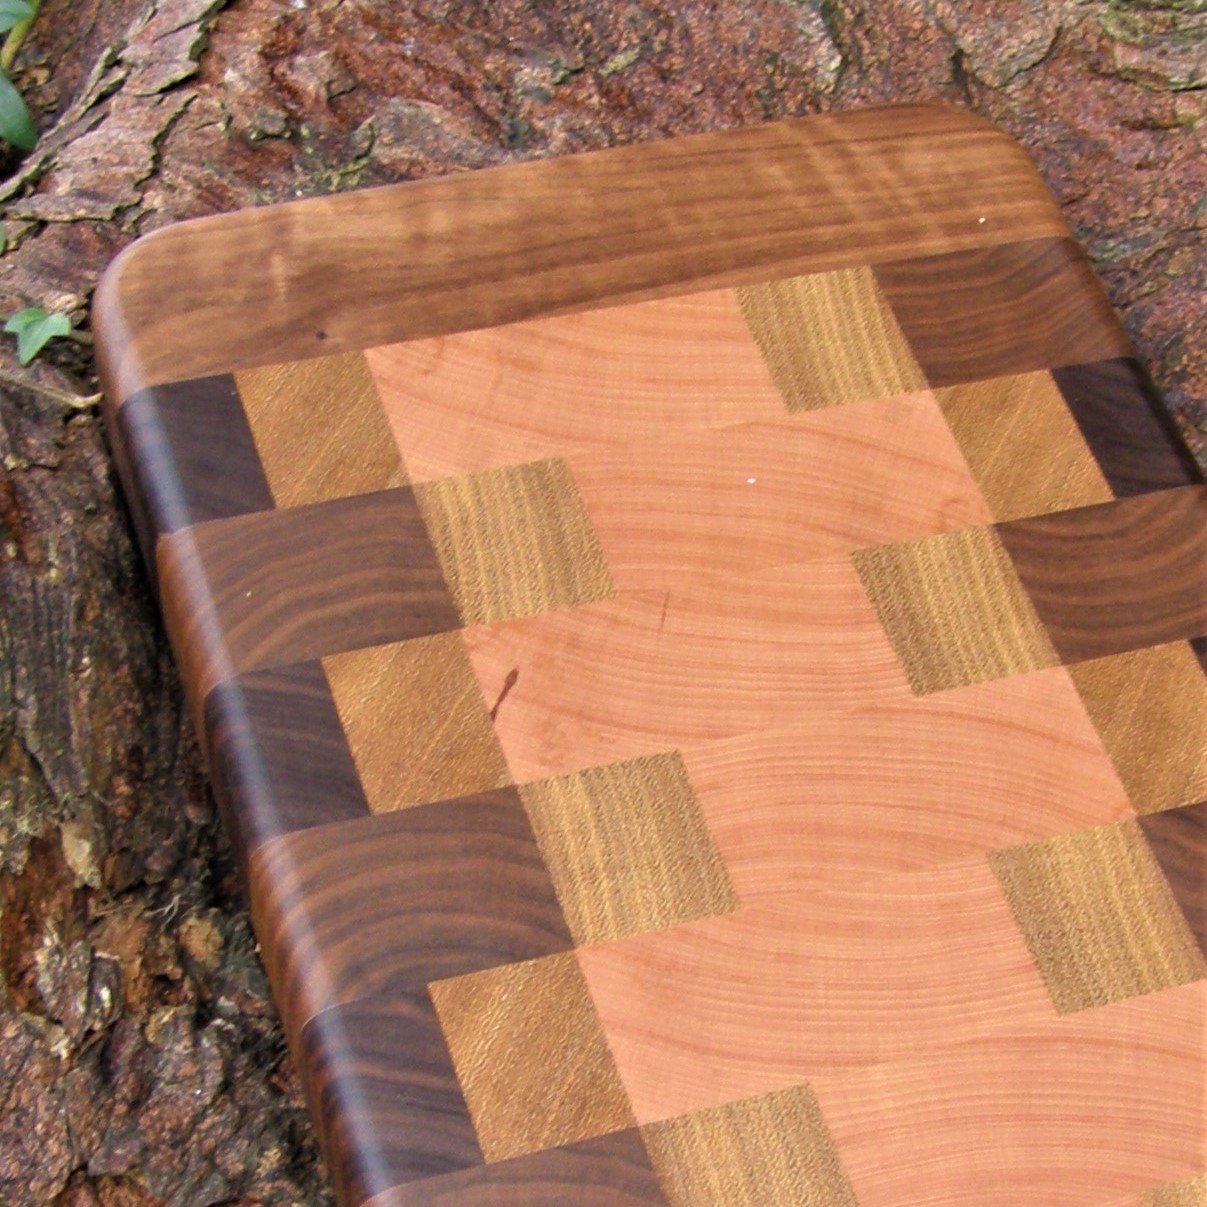 Crookhaven End Grain chopping board by Grant Designs.